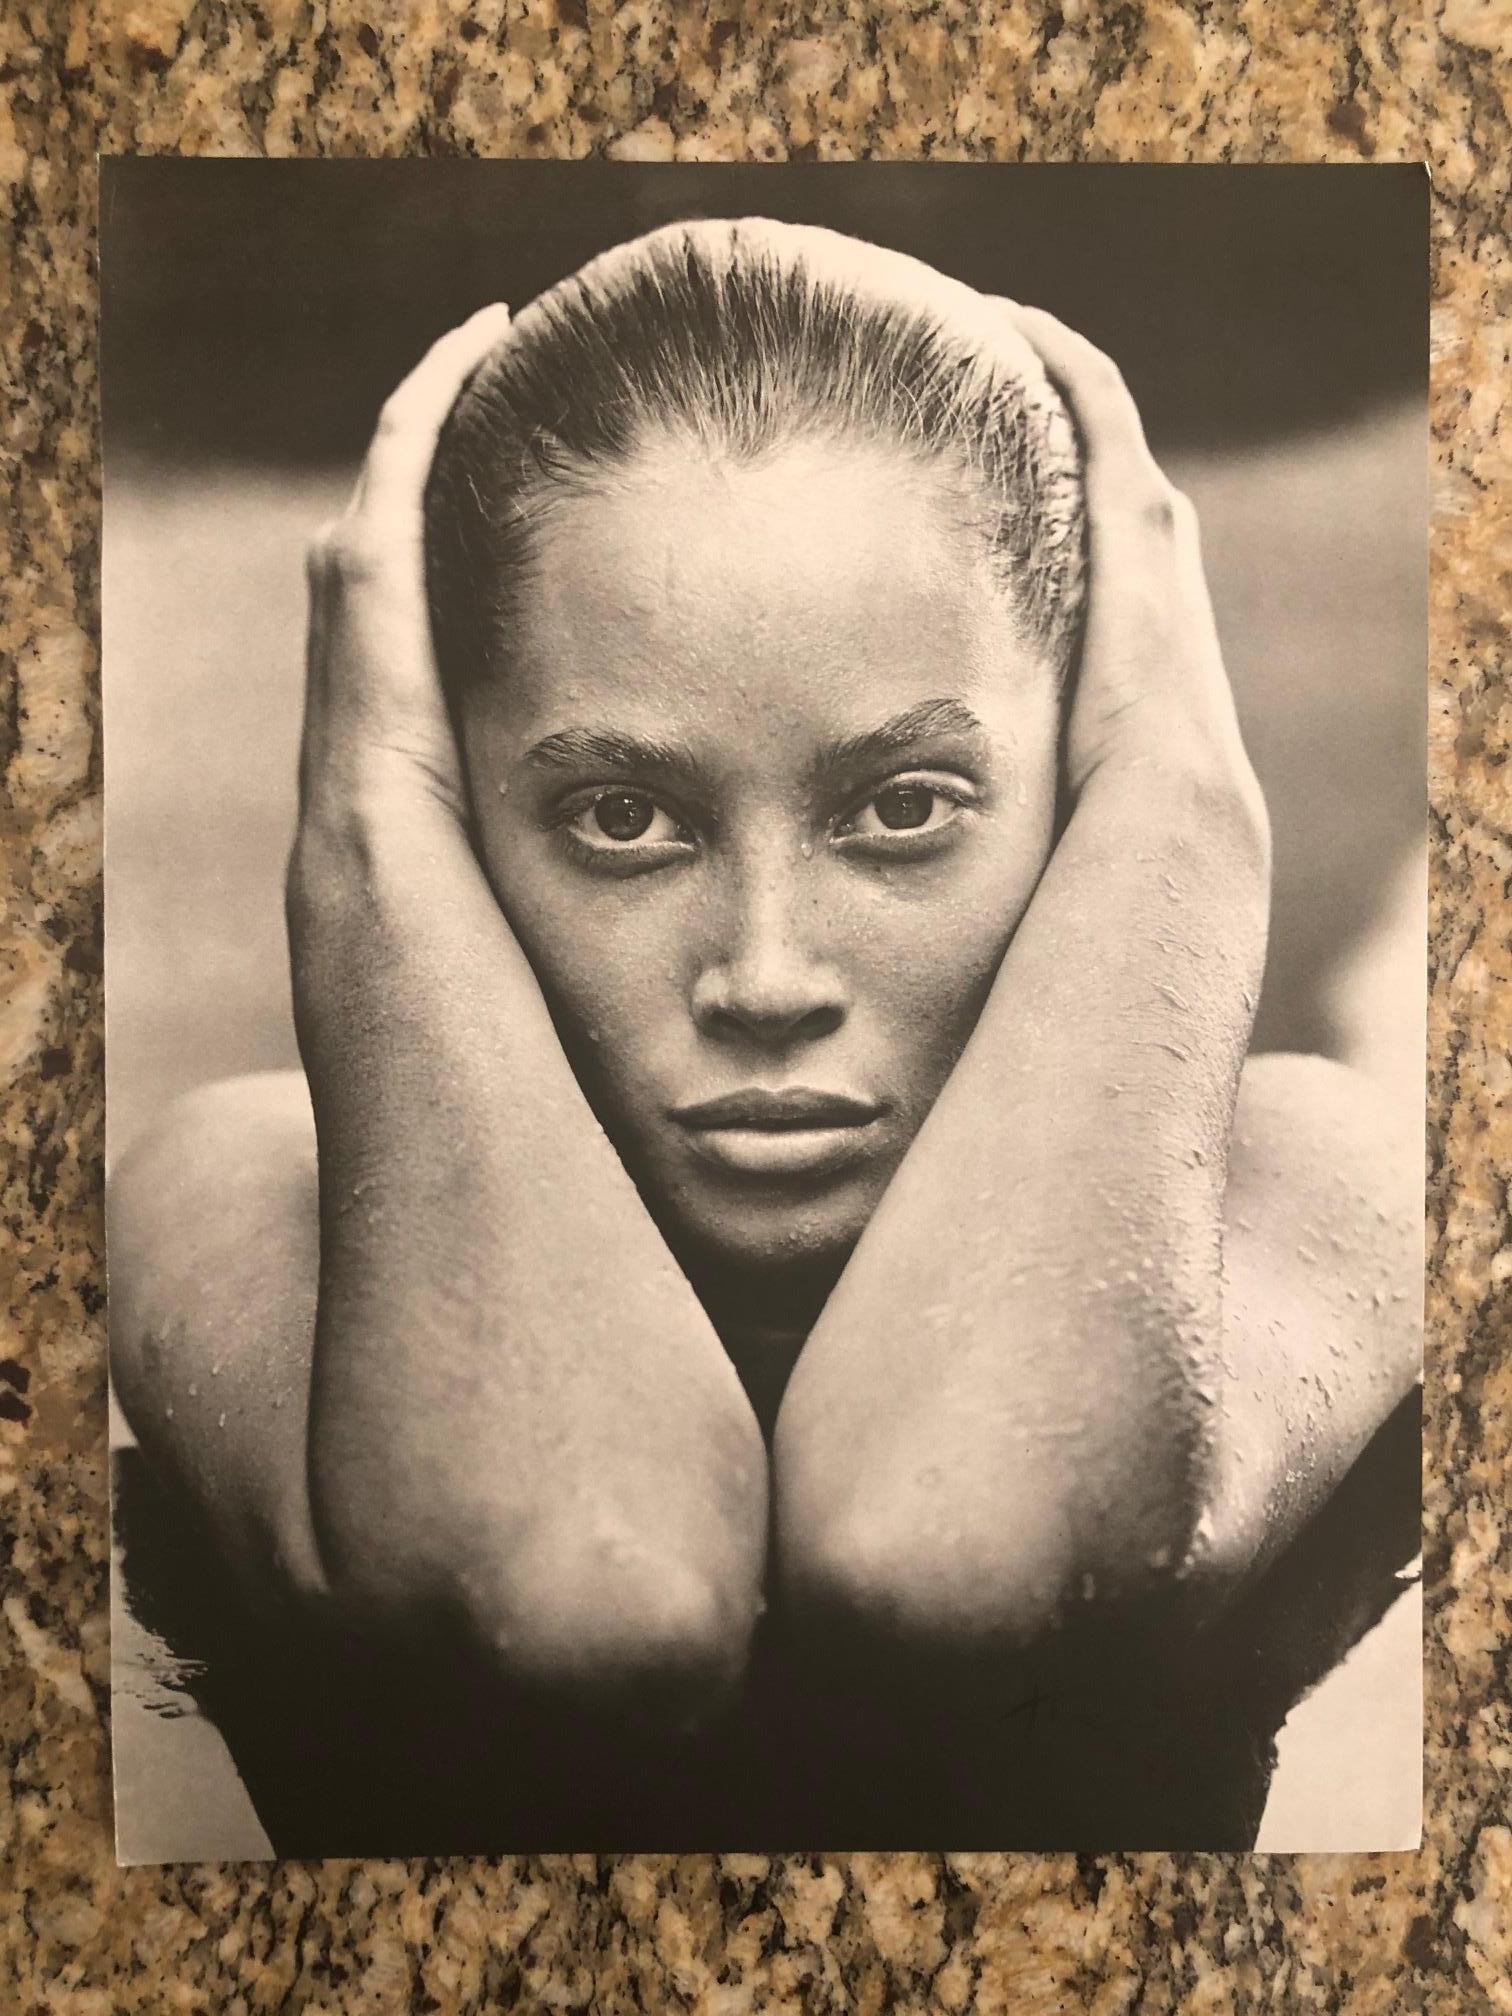 Signed black and white photo of super model, Christy Turlington, by Herb Ritts, circa 1996.